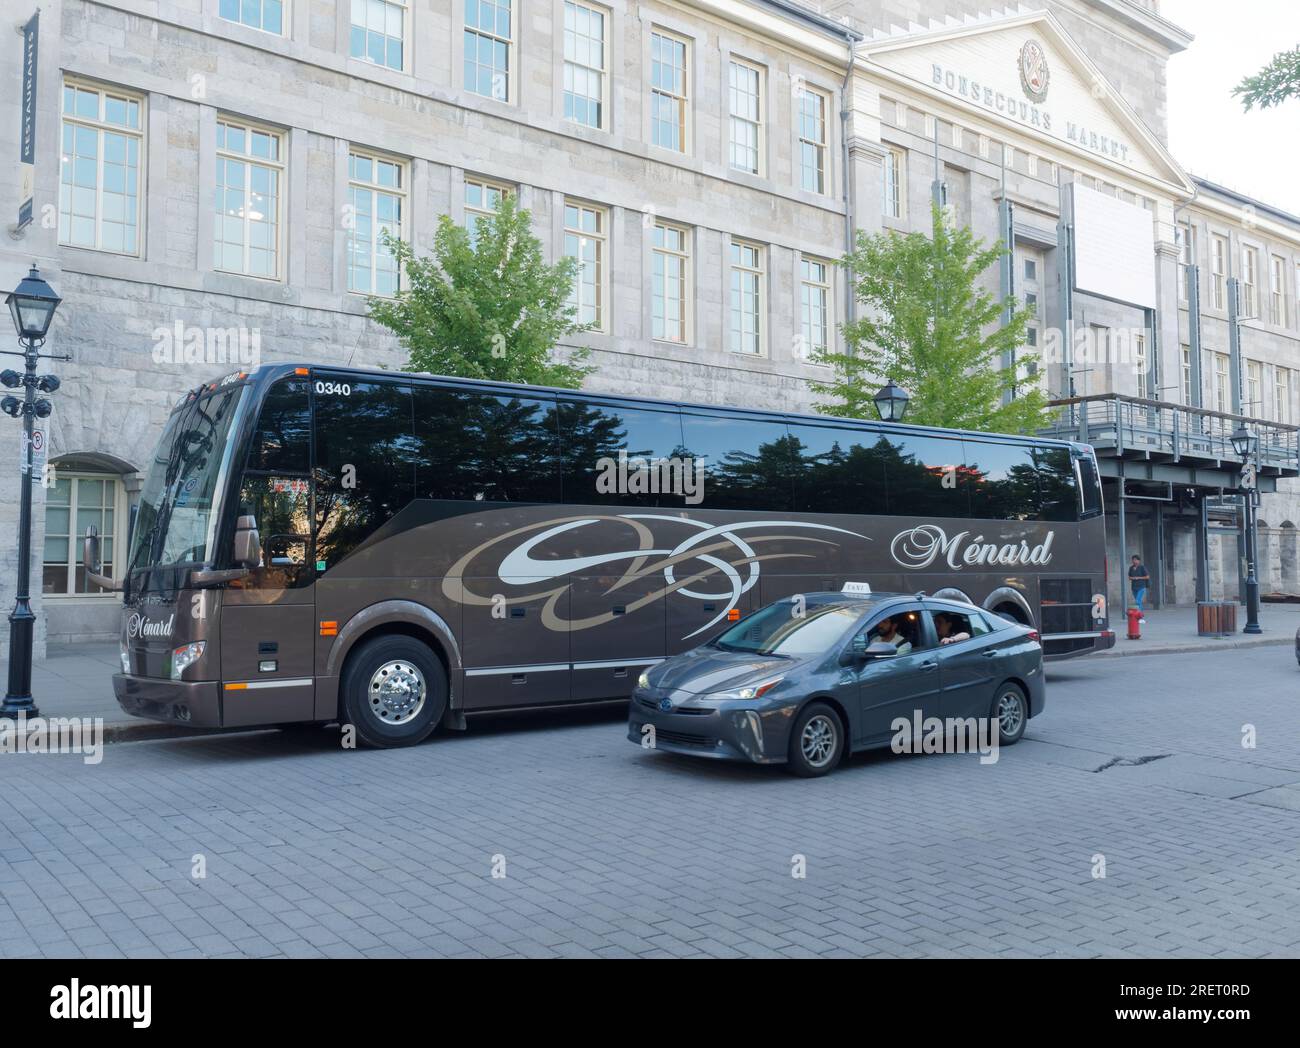 Menard charter coach bus parked curbside in old Montreal, Quebec,Canada Stock Photo